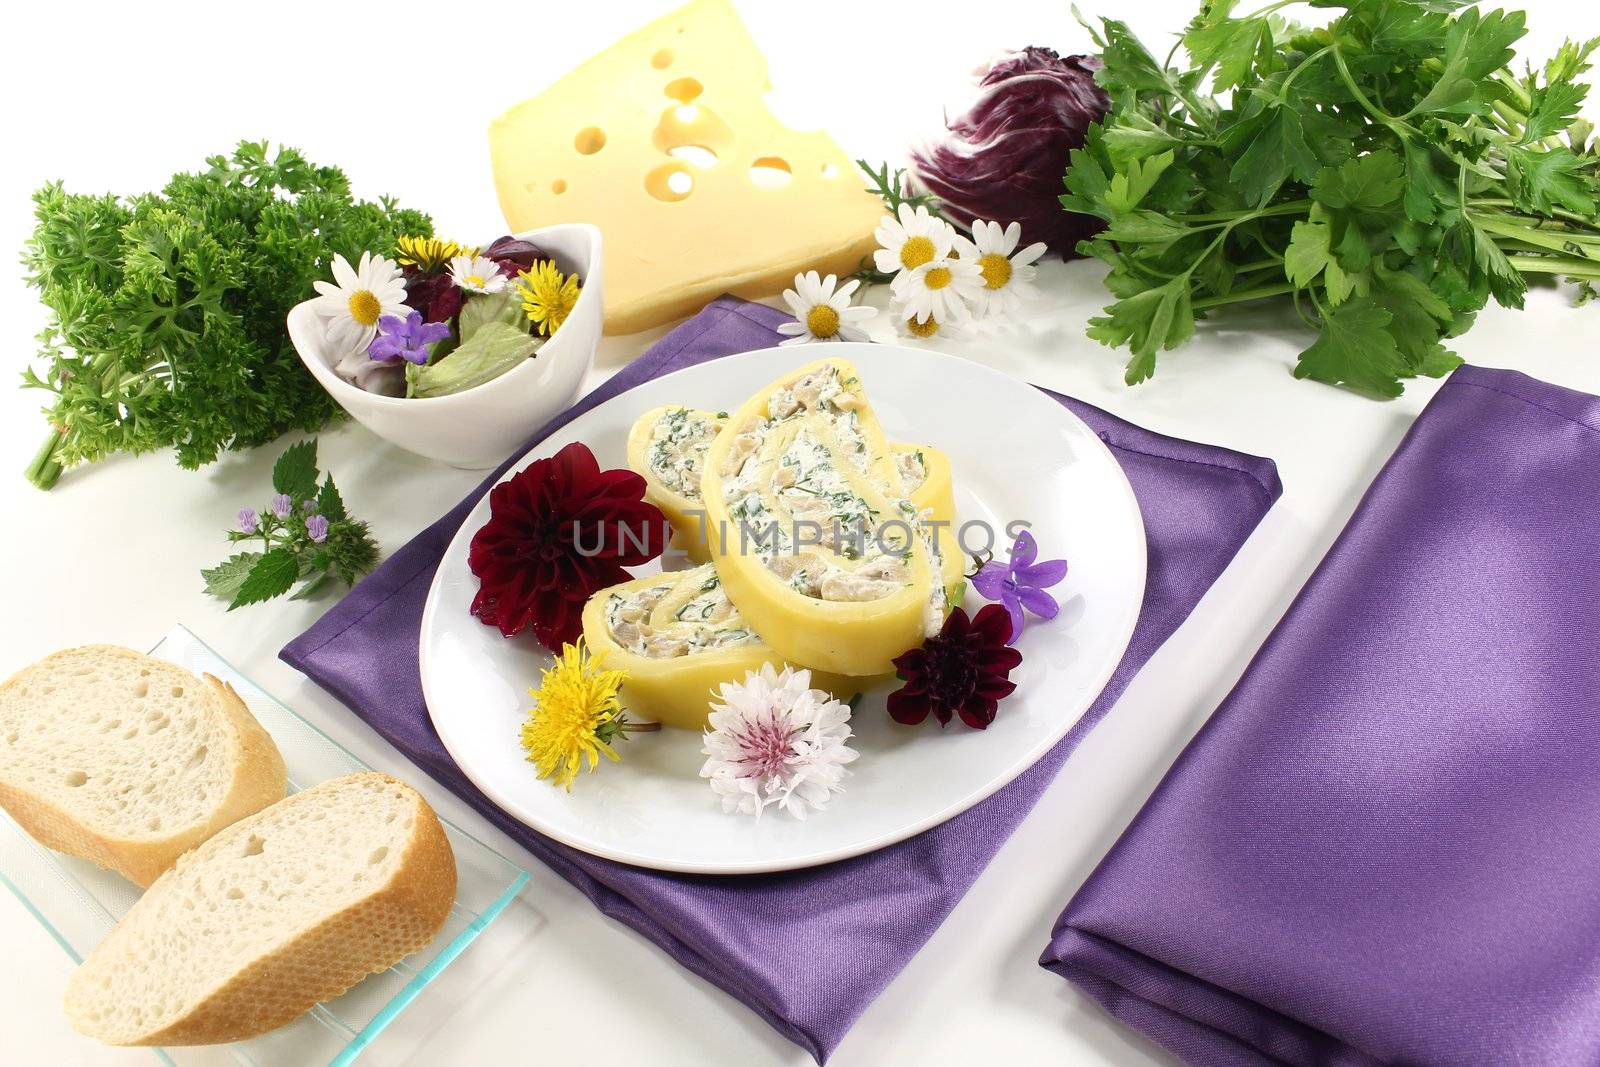 Cheese rolls with wild herb salad, bread and edible flowers